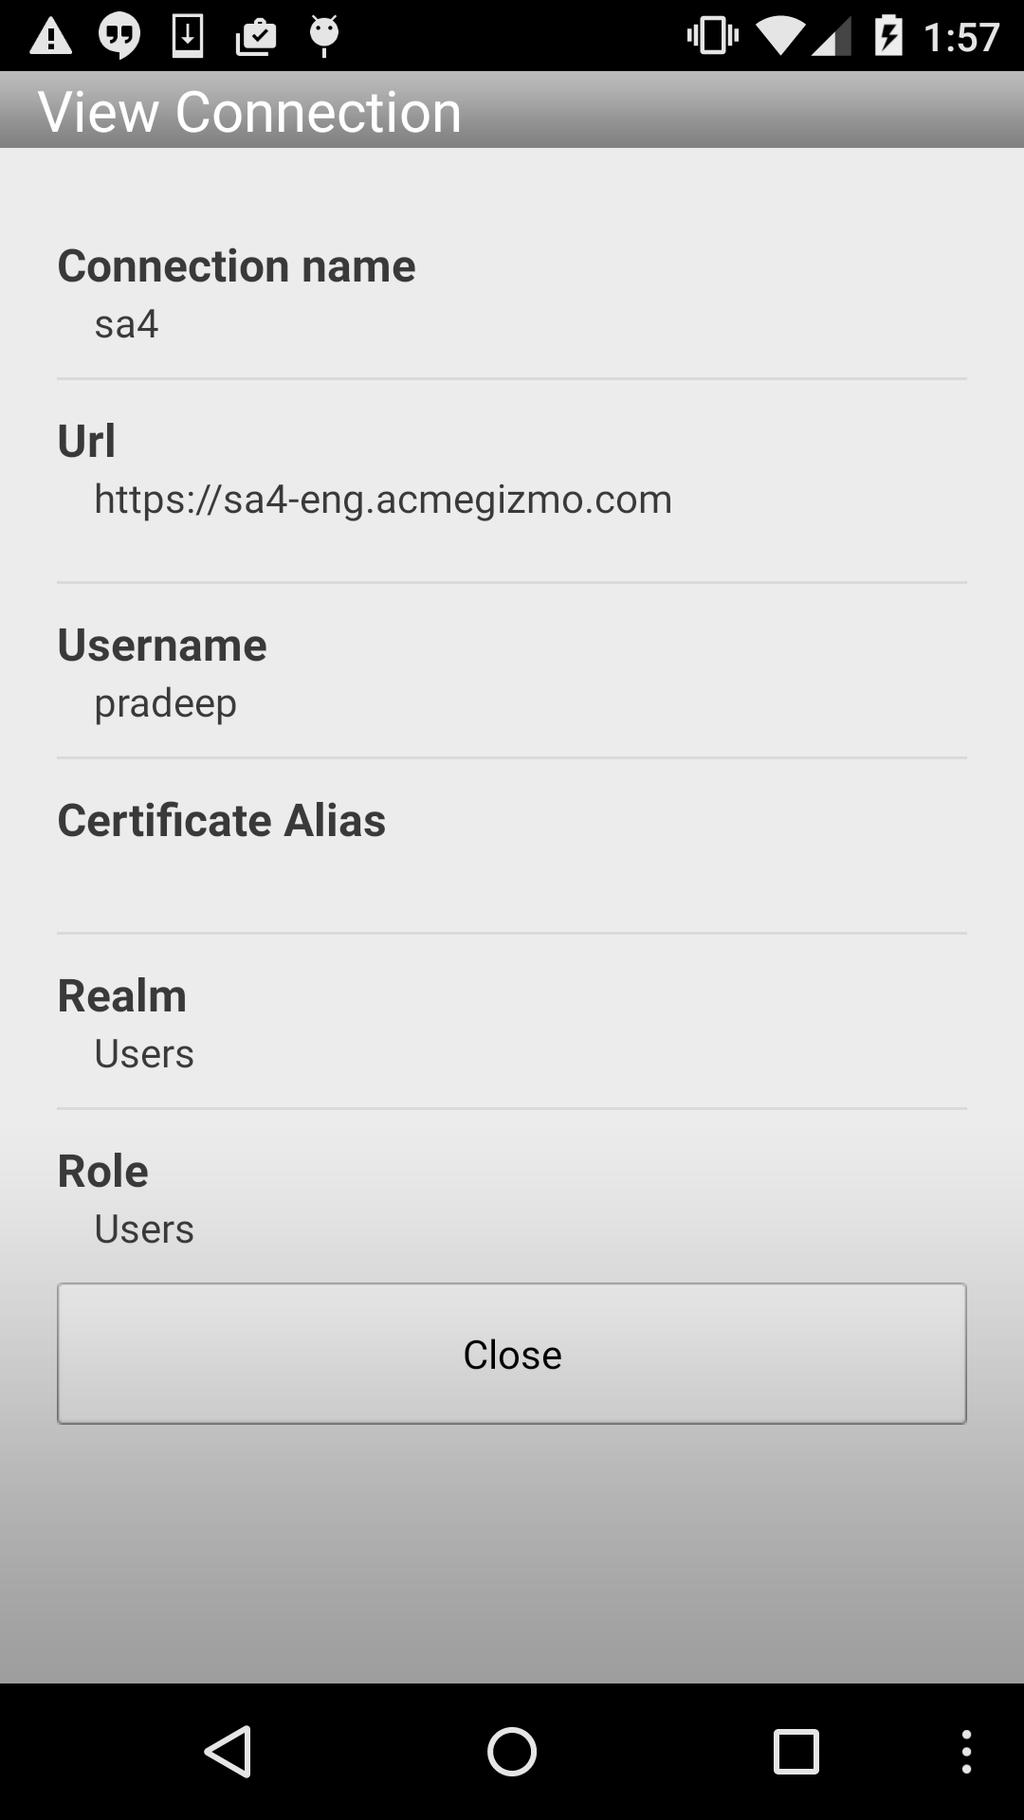 10. Add a VPN configuration with realm and role.